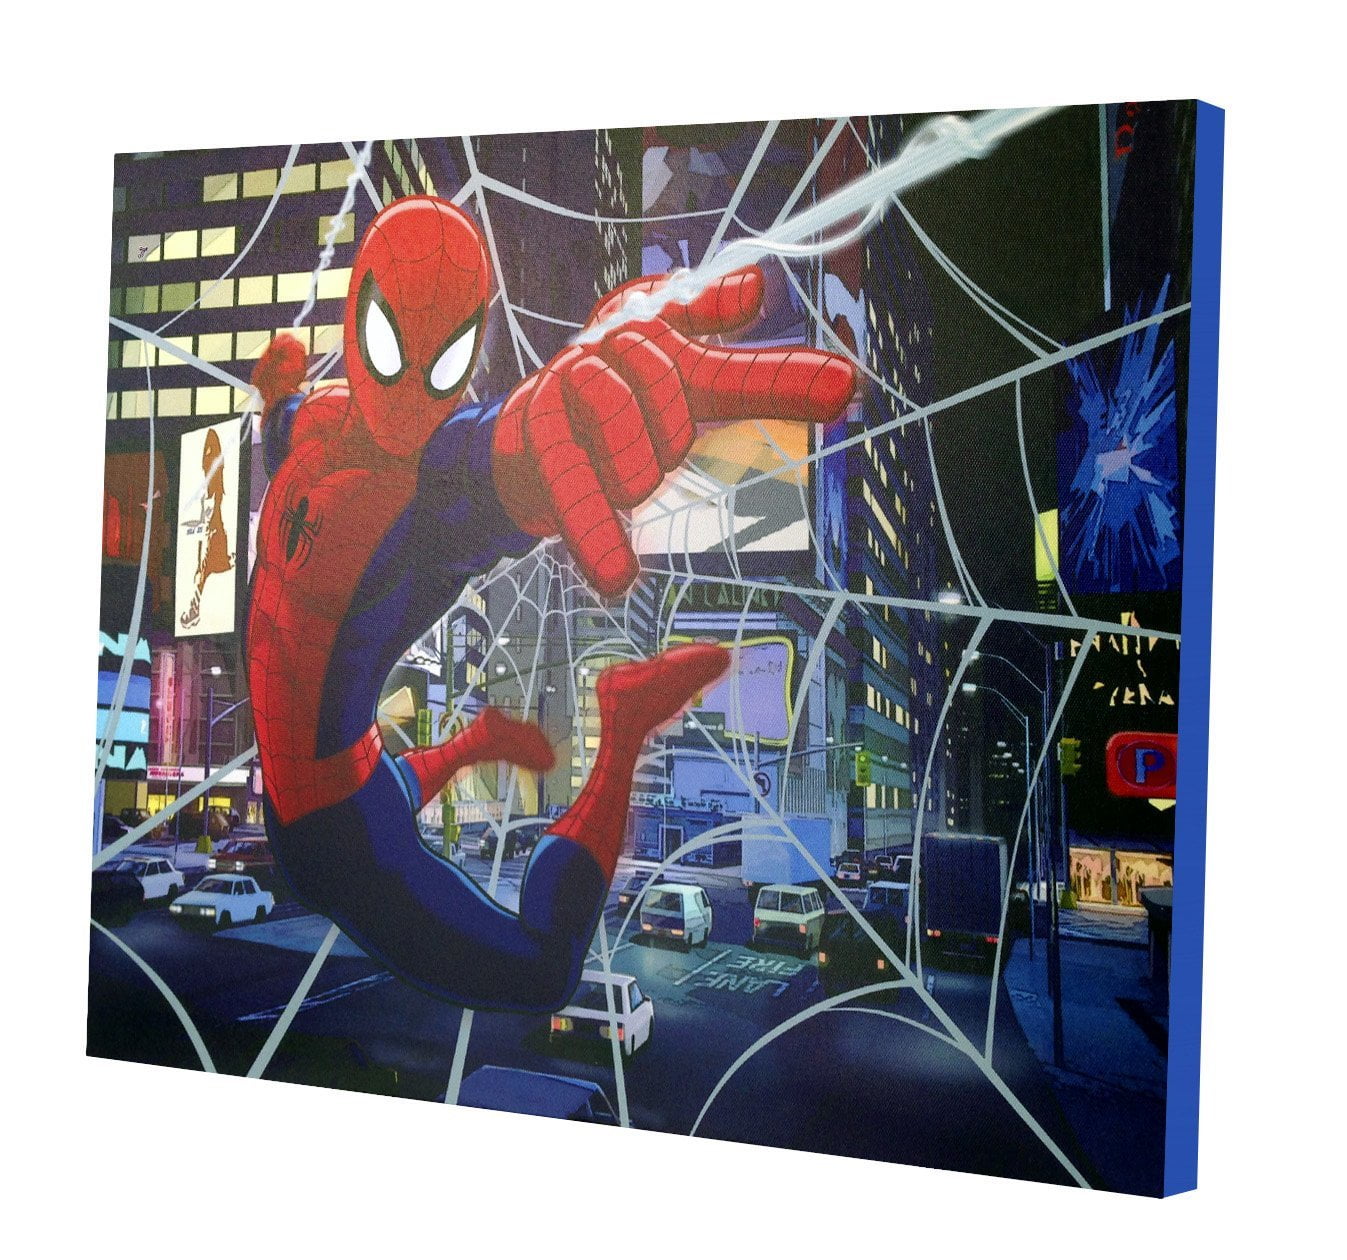 Ideal To Match Spiderman Duvets & Spiderman Wall Decals. Spiderman Lampshades